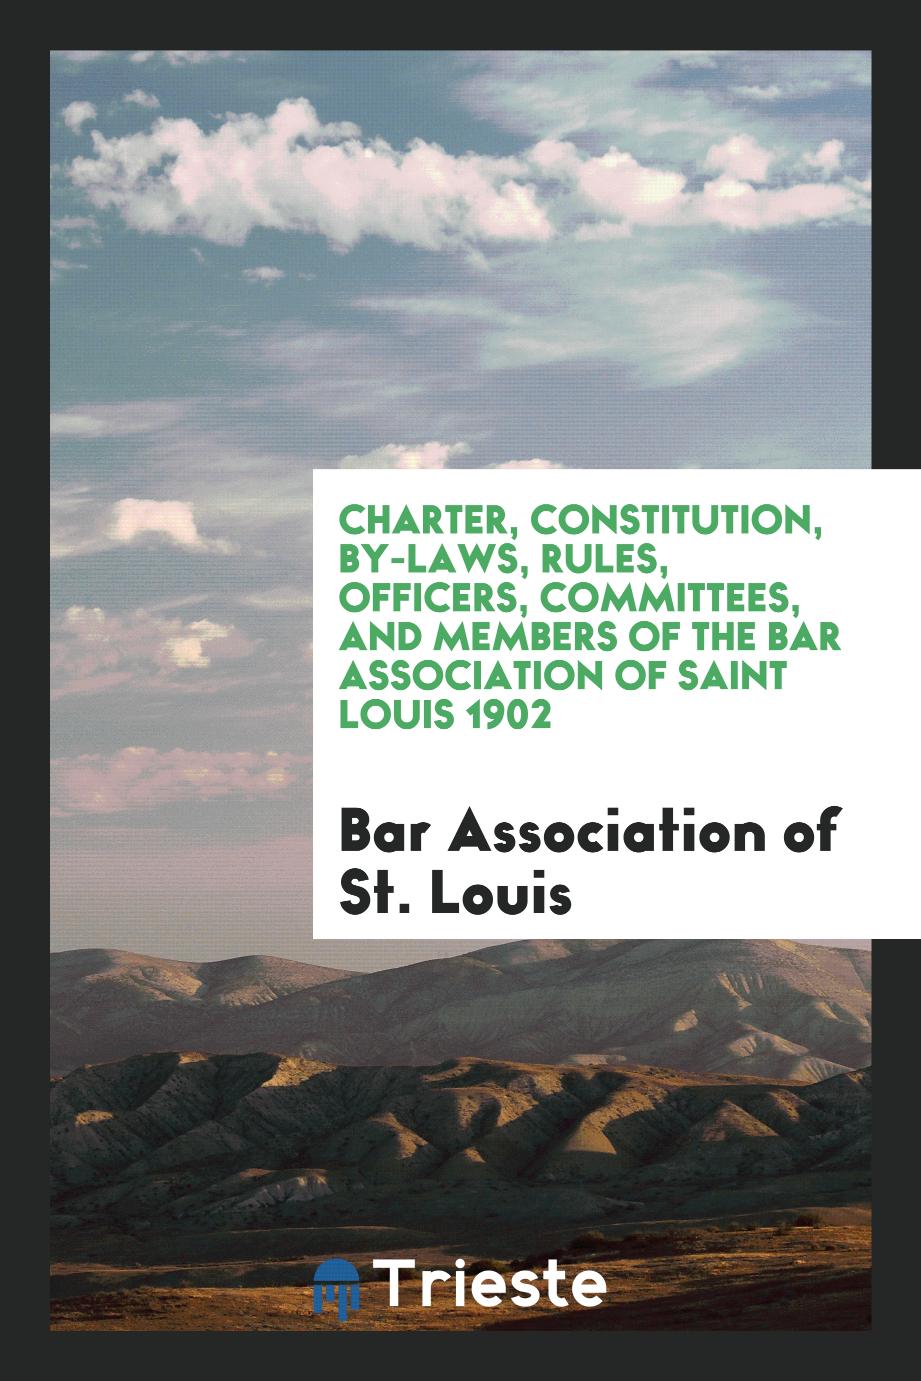 Charter, constitution, by-laws, rules, officers, committees, and members of the bar association of Saint Louis 1902